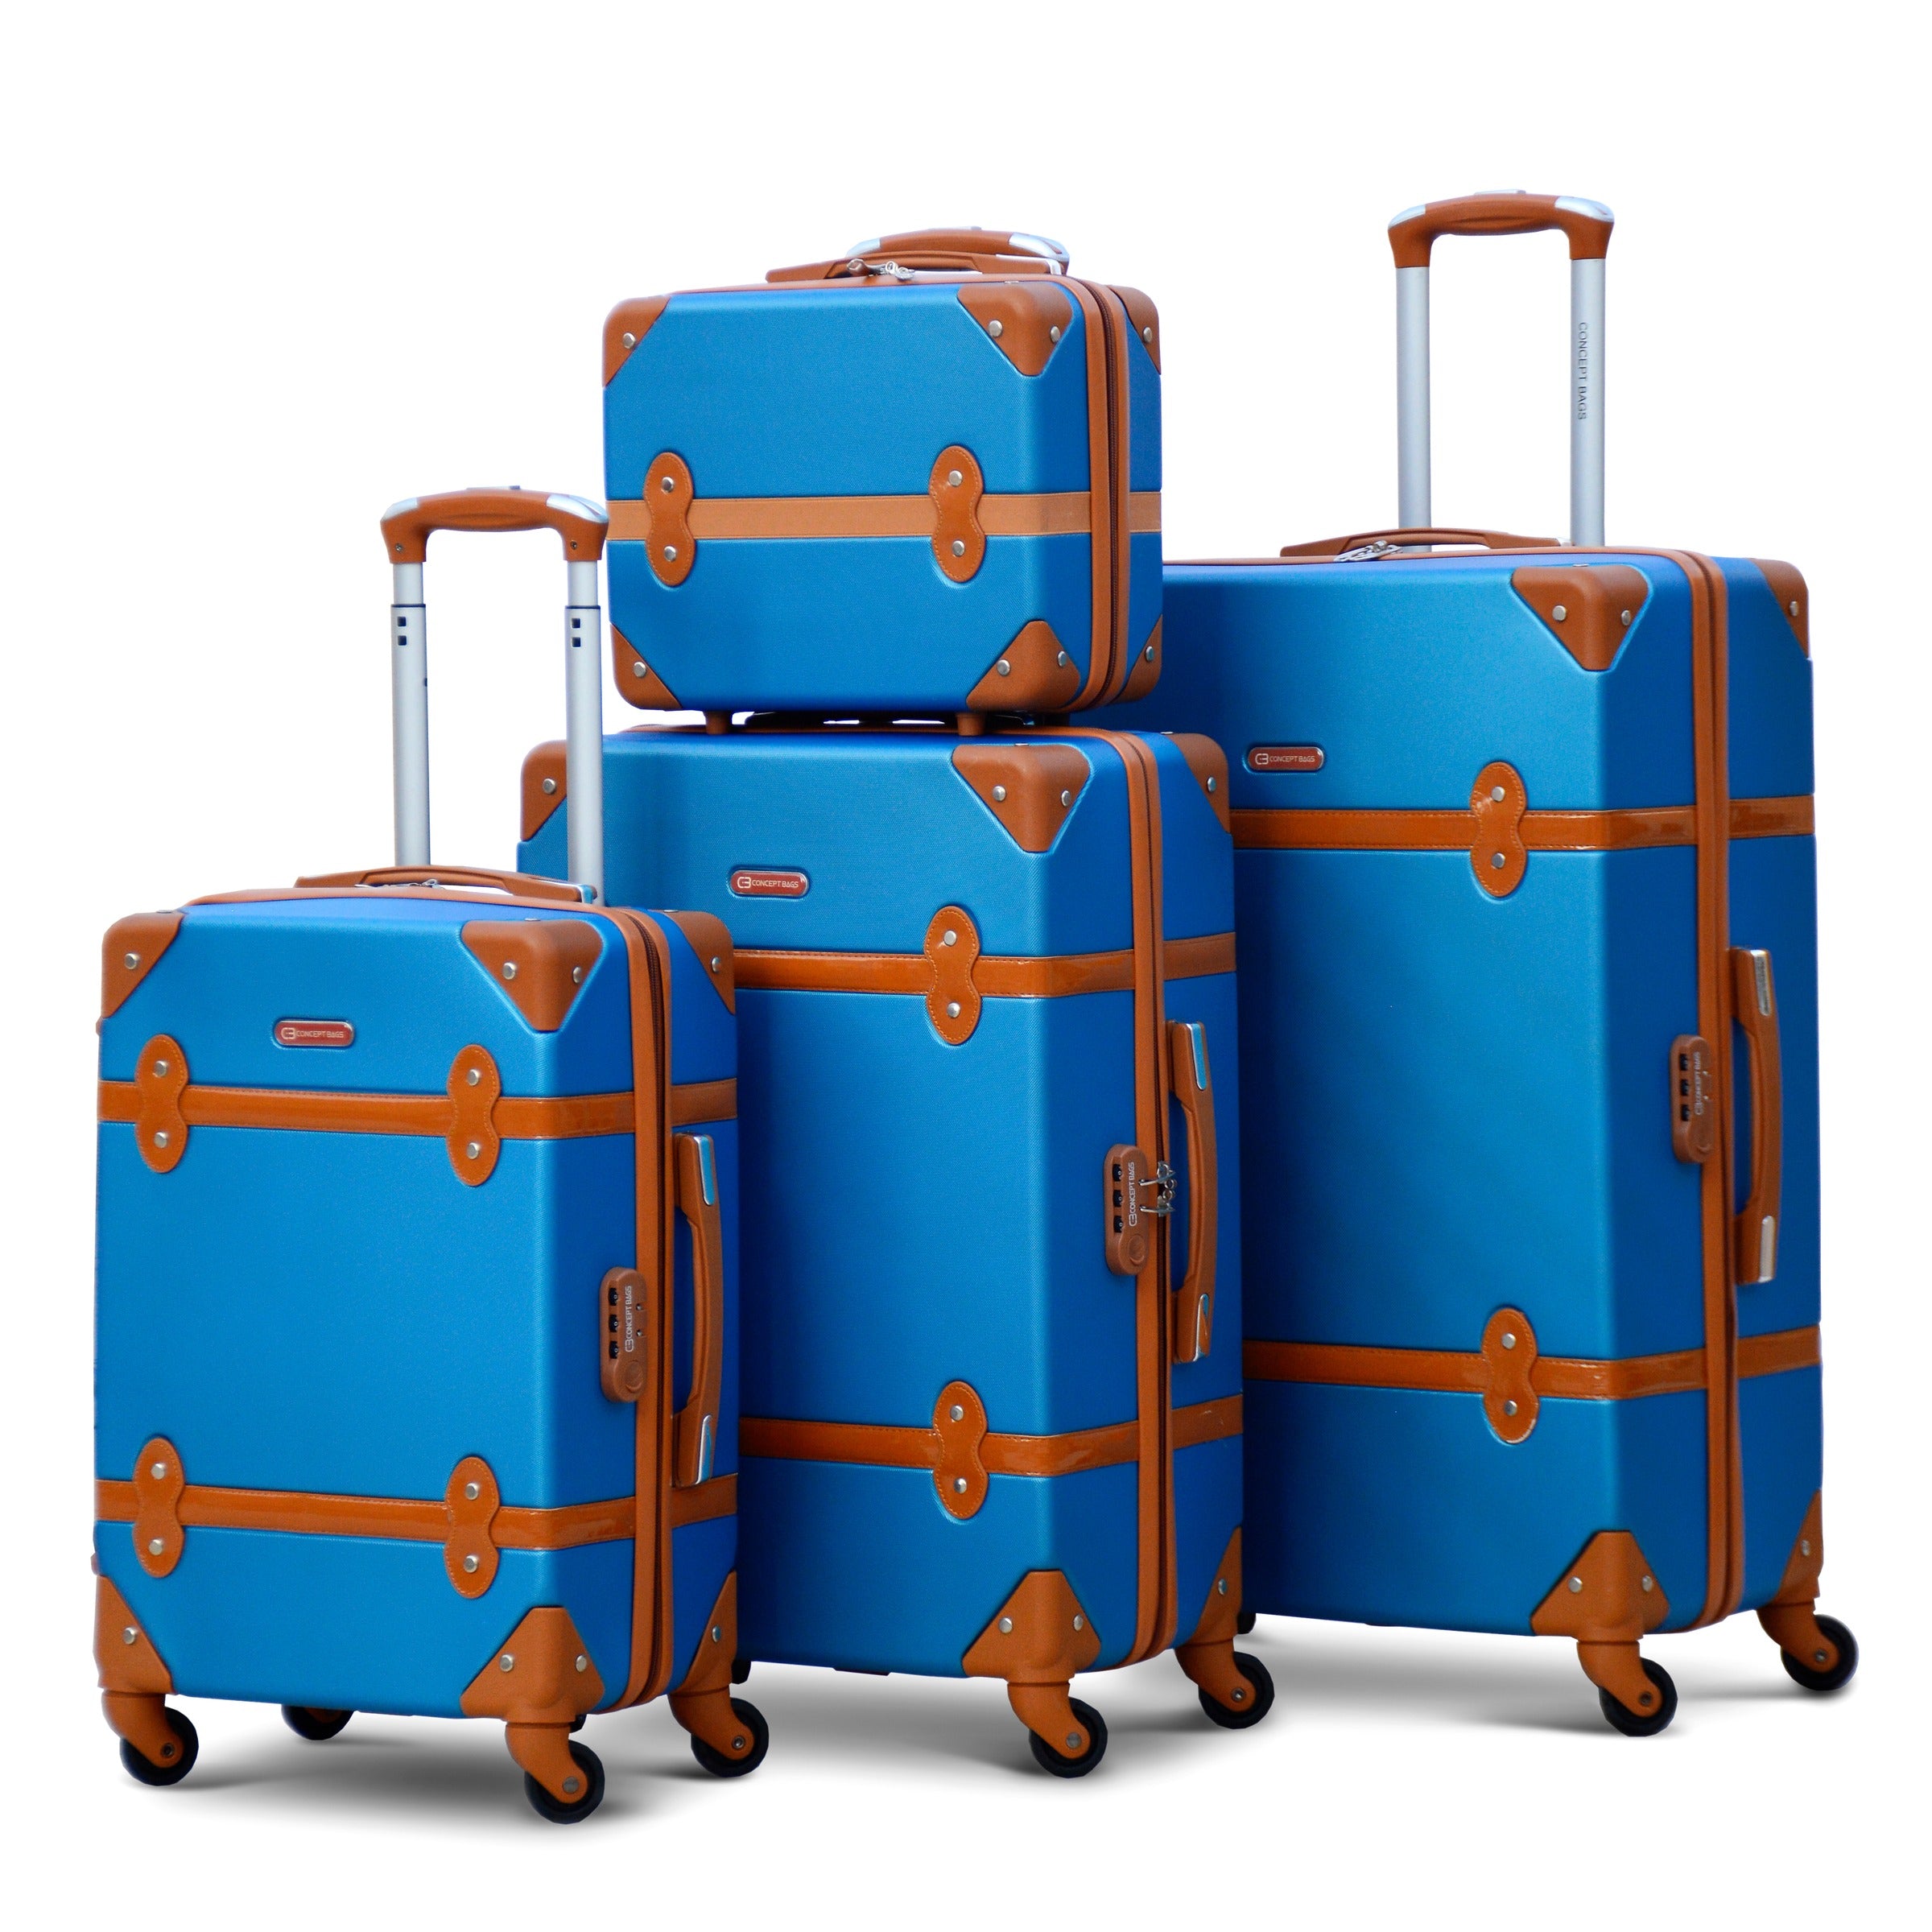 Corner Guard Lightweight ABS Luggage | Hard Case Trolley Bag | 4 Pcs Full Set 7” 20” 24” 28 inches | 2 Years Warranty | Blue